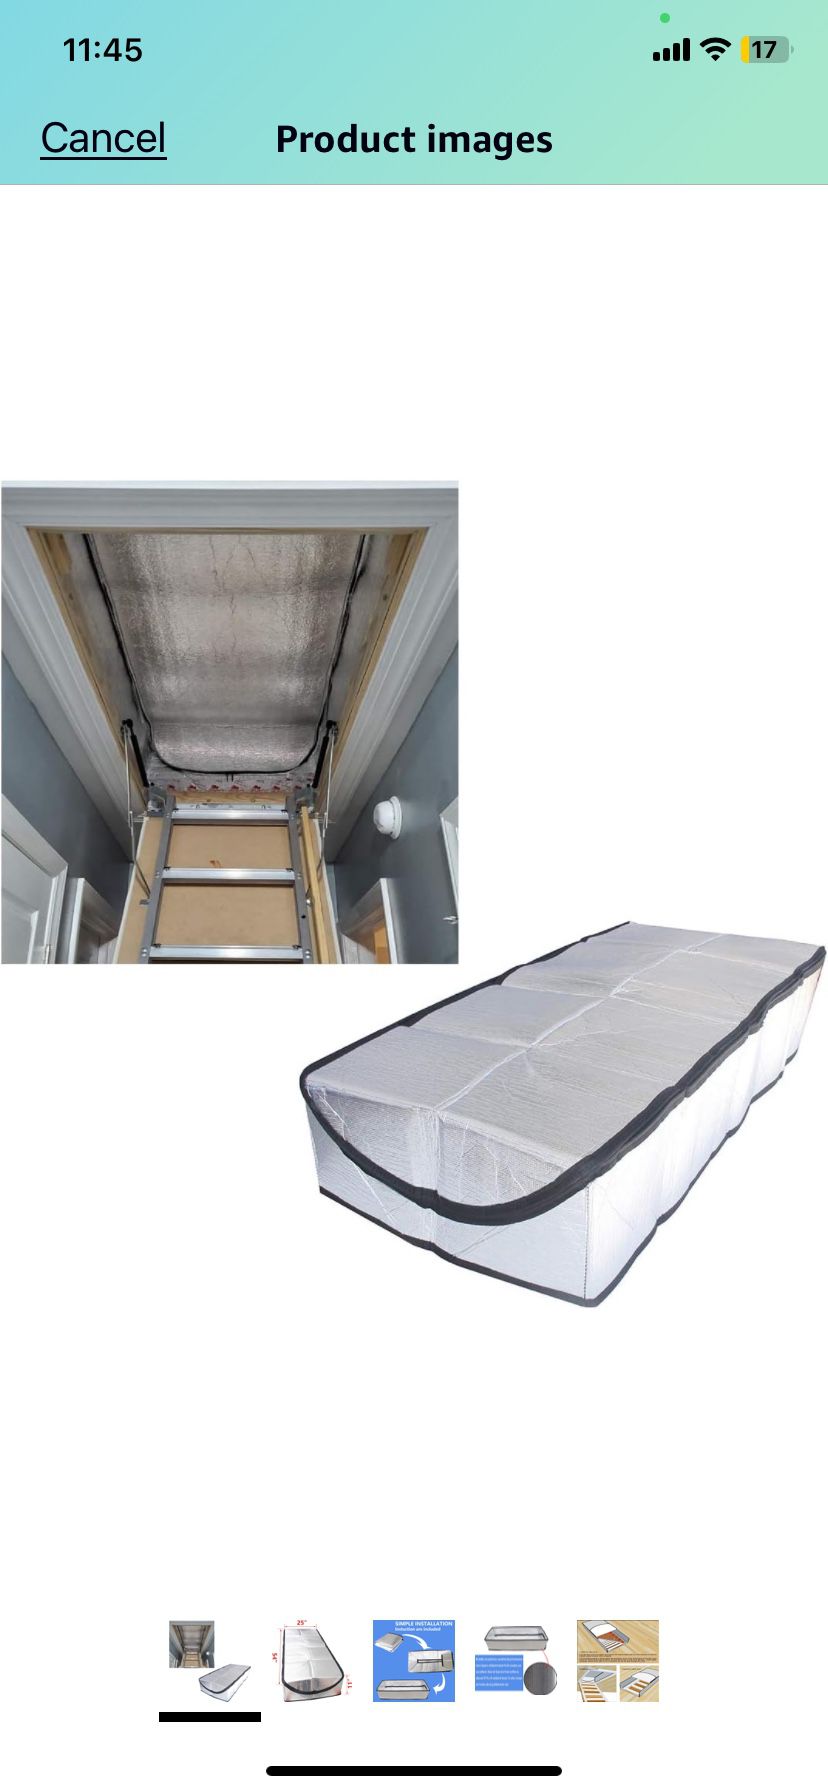 Attic Stairway Insulation Cover - Premium Energy Saving Attic Stairs Door Ladder Insulator Pull Down Tent with Zipper 25 in x 54 in x 11In (Attic Cove